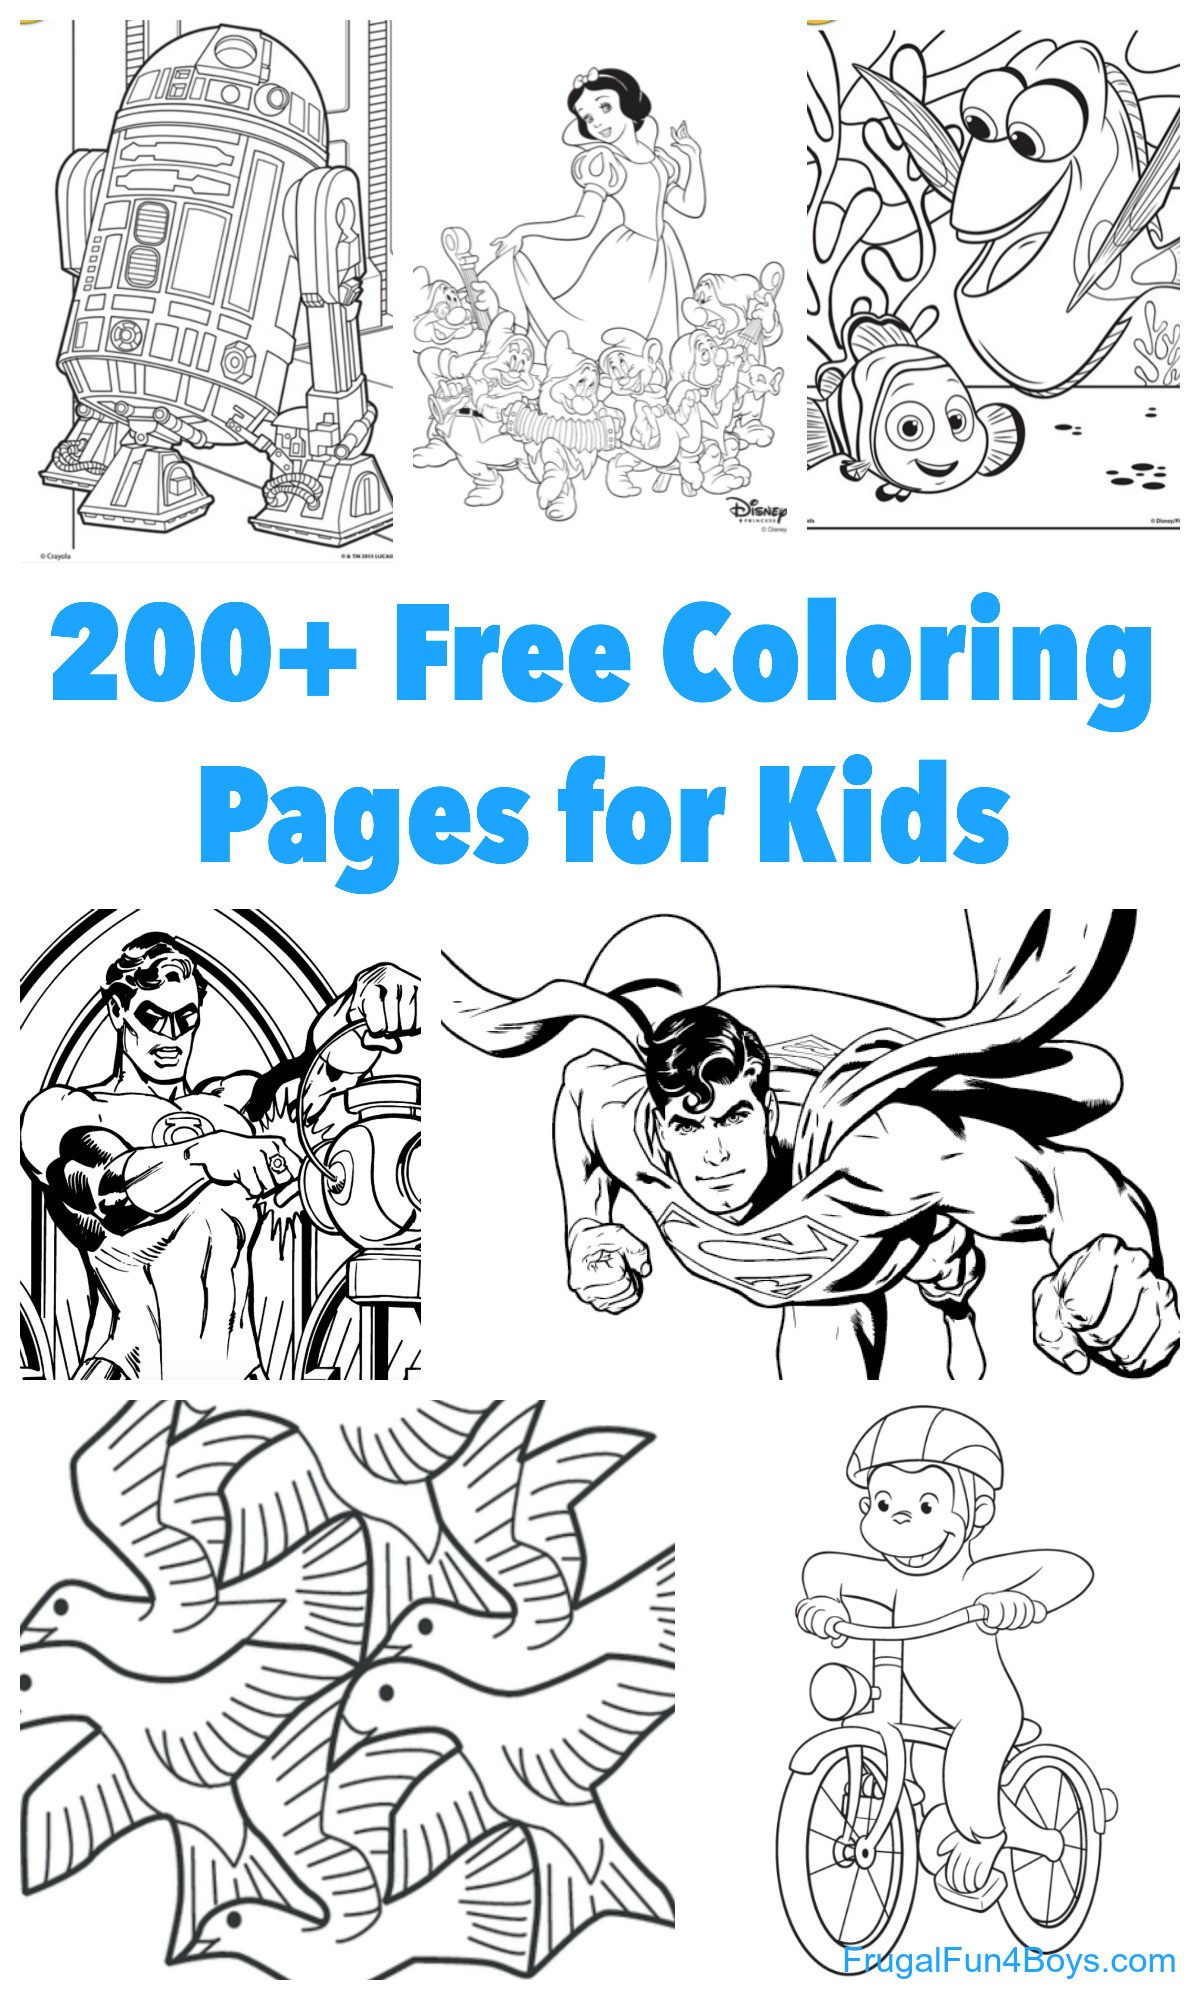 Coloring Sheets For Boys Printable
 200 Printable Coloring Pages for Kids Frugal Fun For